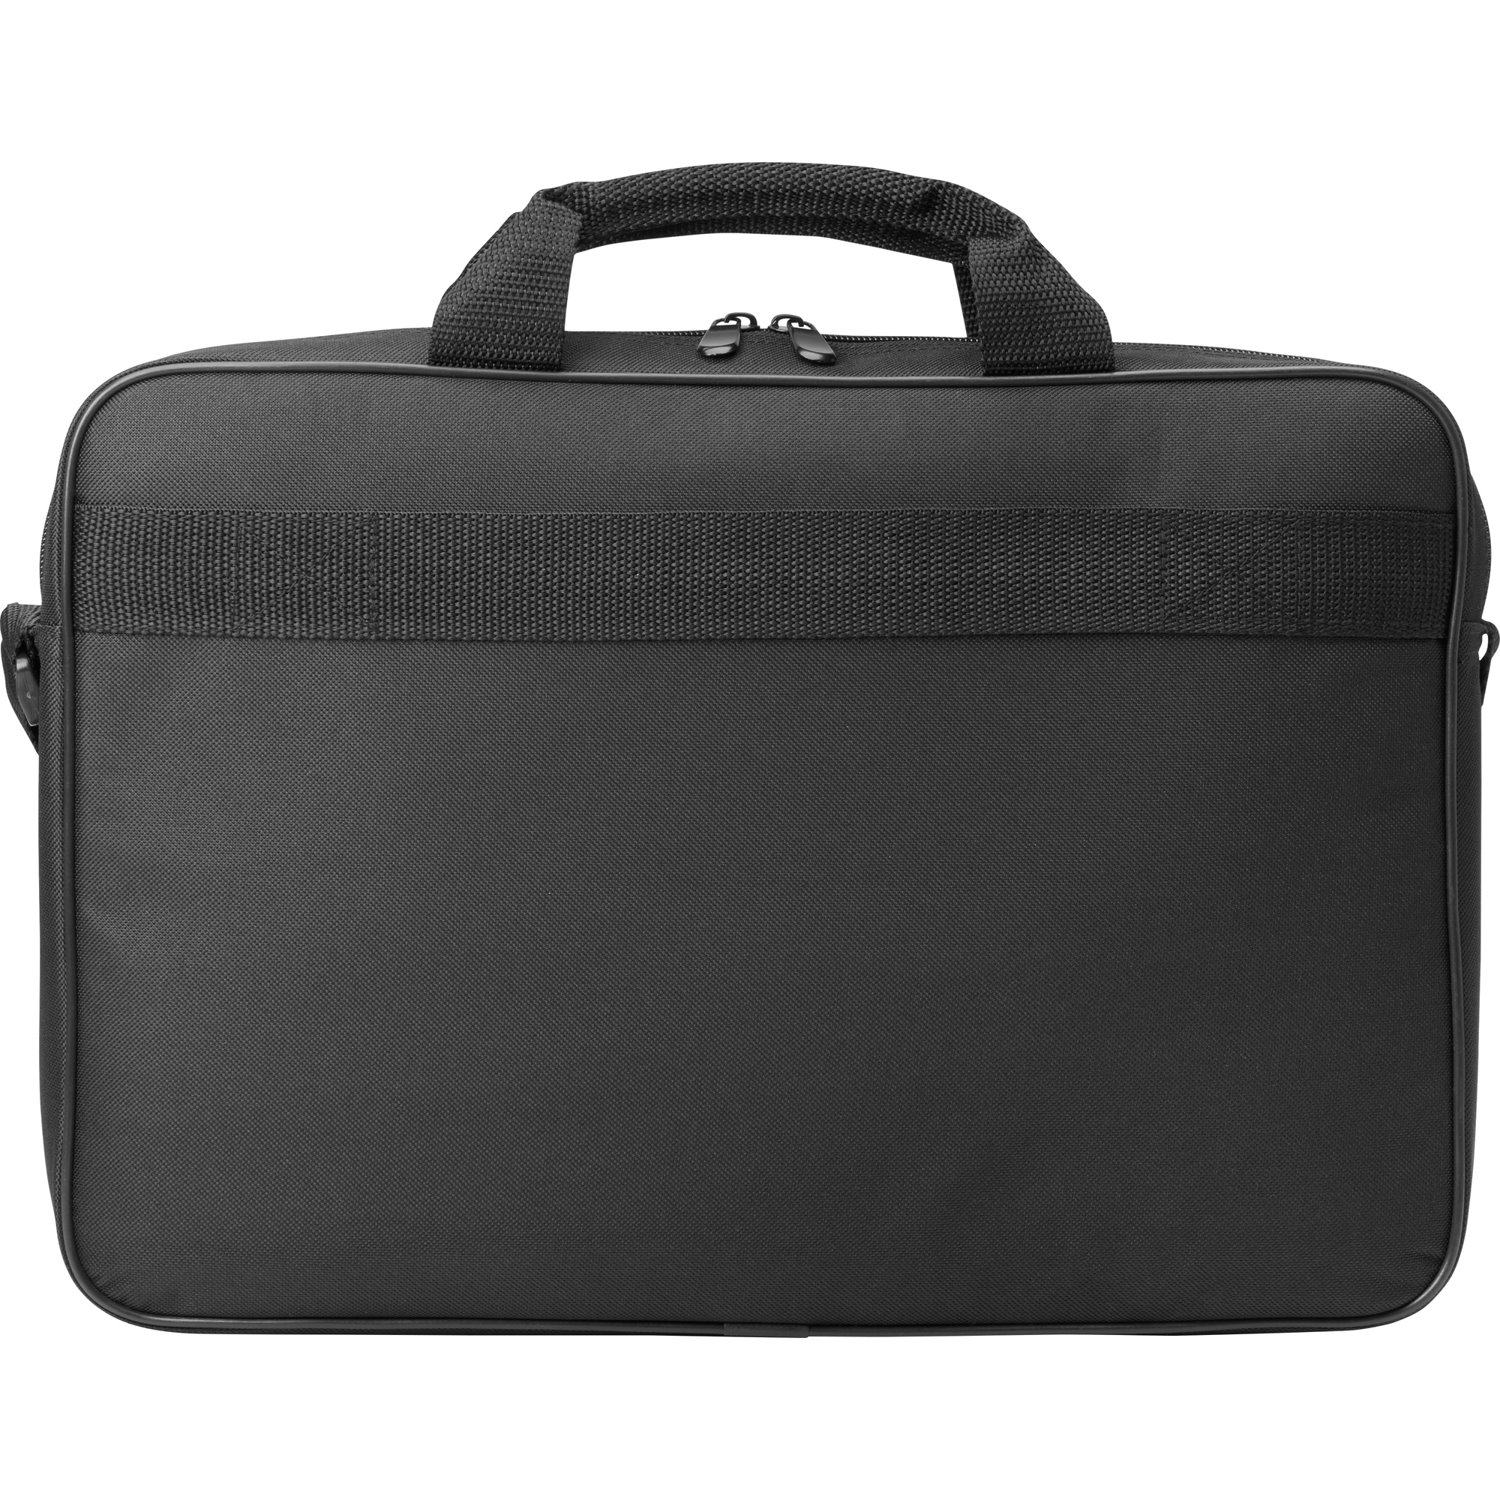 HP Prelude Carrying Case for 33 cm (13") to 39.6 cm (15.6") Notebook - Black